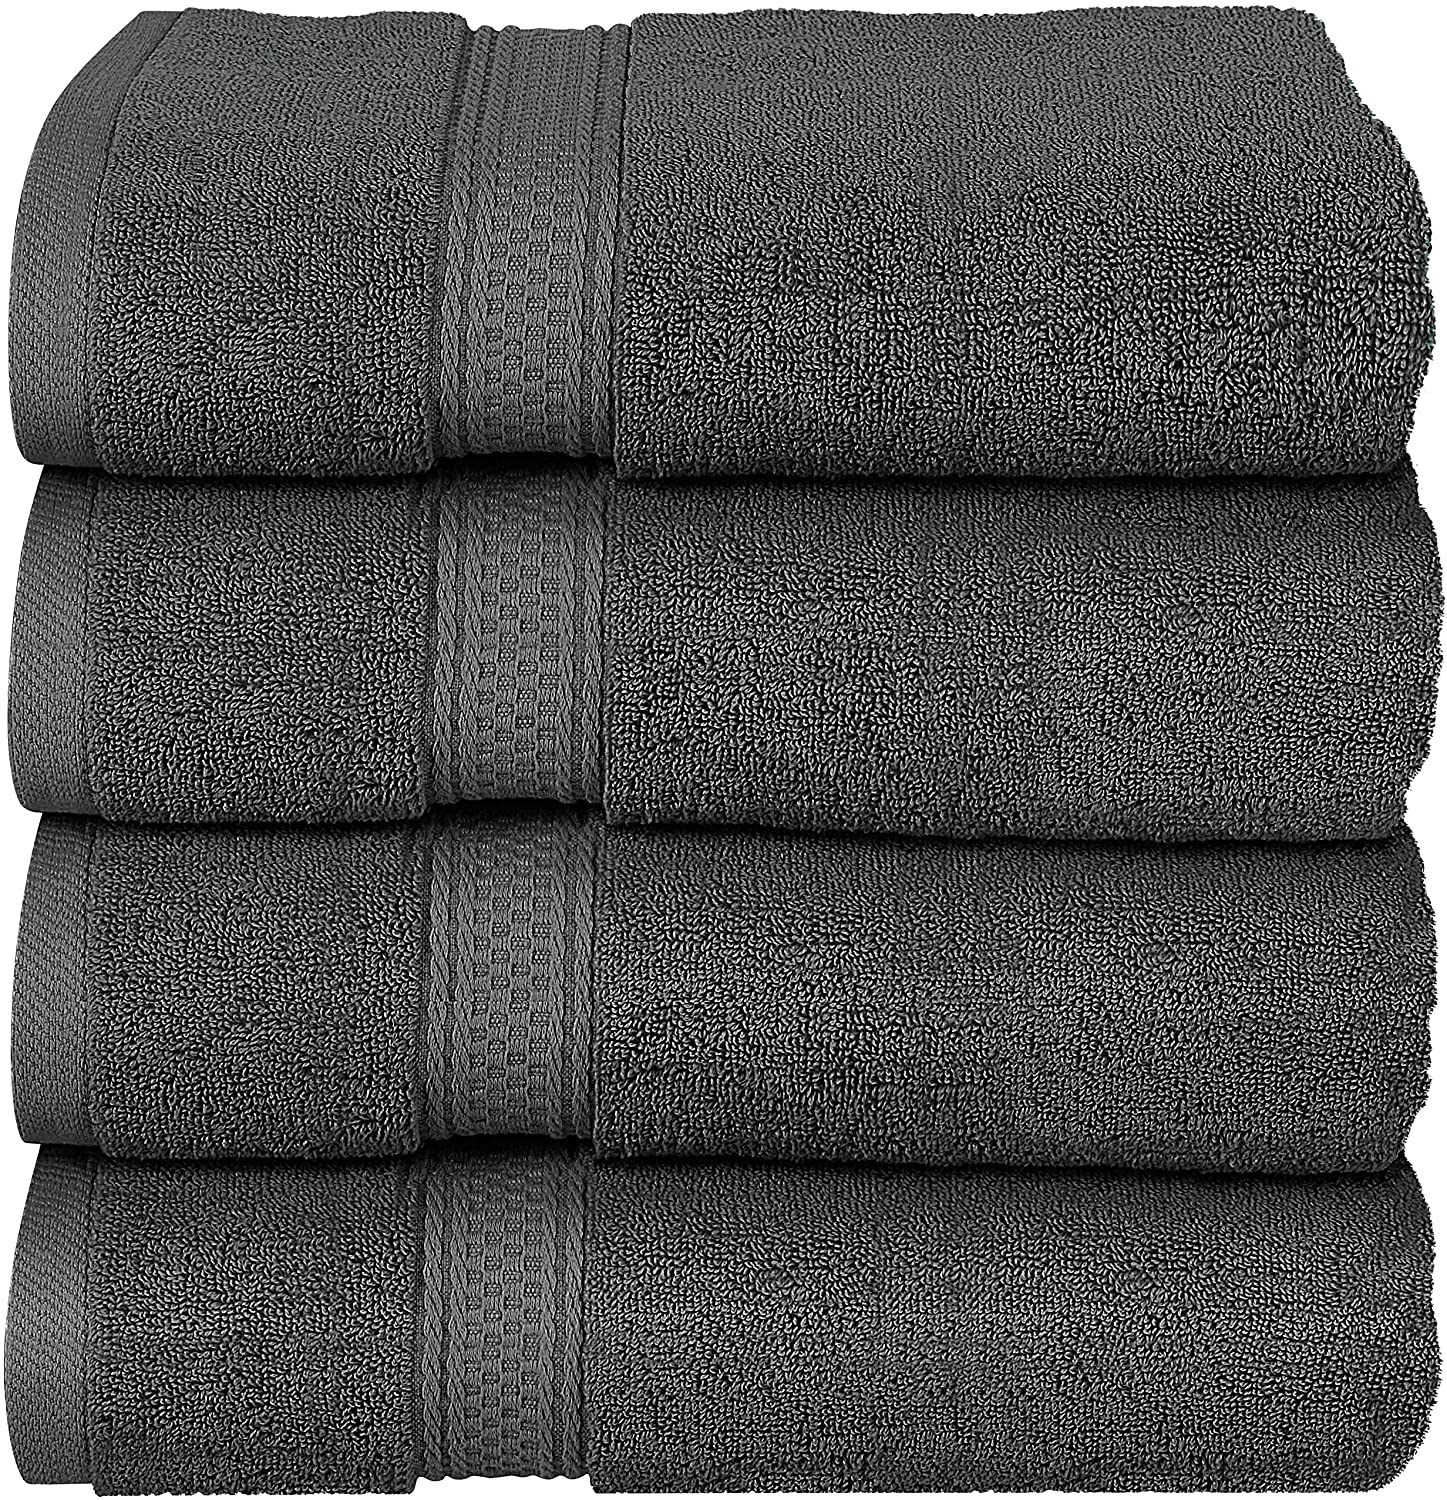 Utopia Towels - Grey Bath Towels Set, 4 Pack - Premium 600 GSM 100% Ring  Spun Cotton - Quick Dry, Highly Absorbent, Soft Feel Towels, Perfect for 